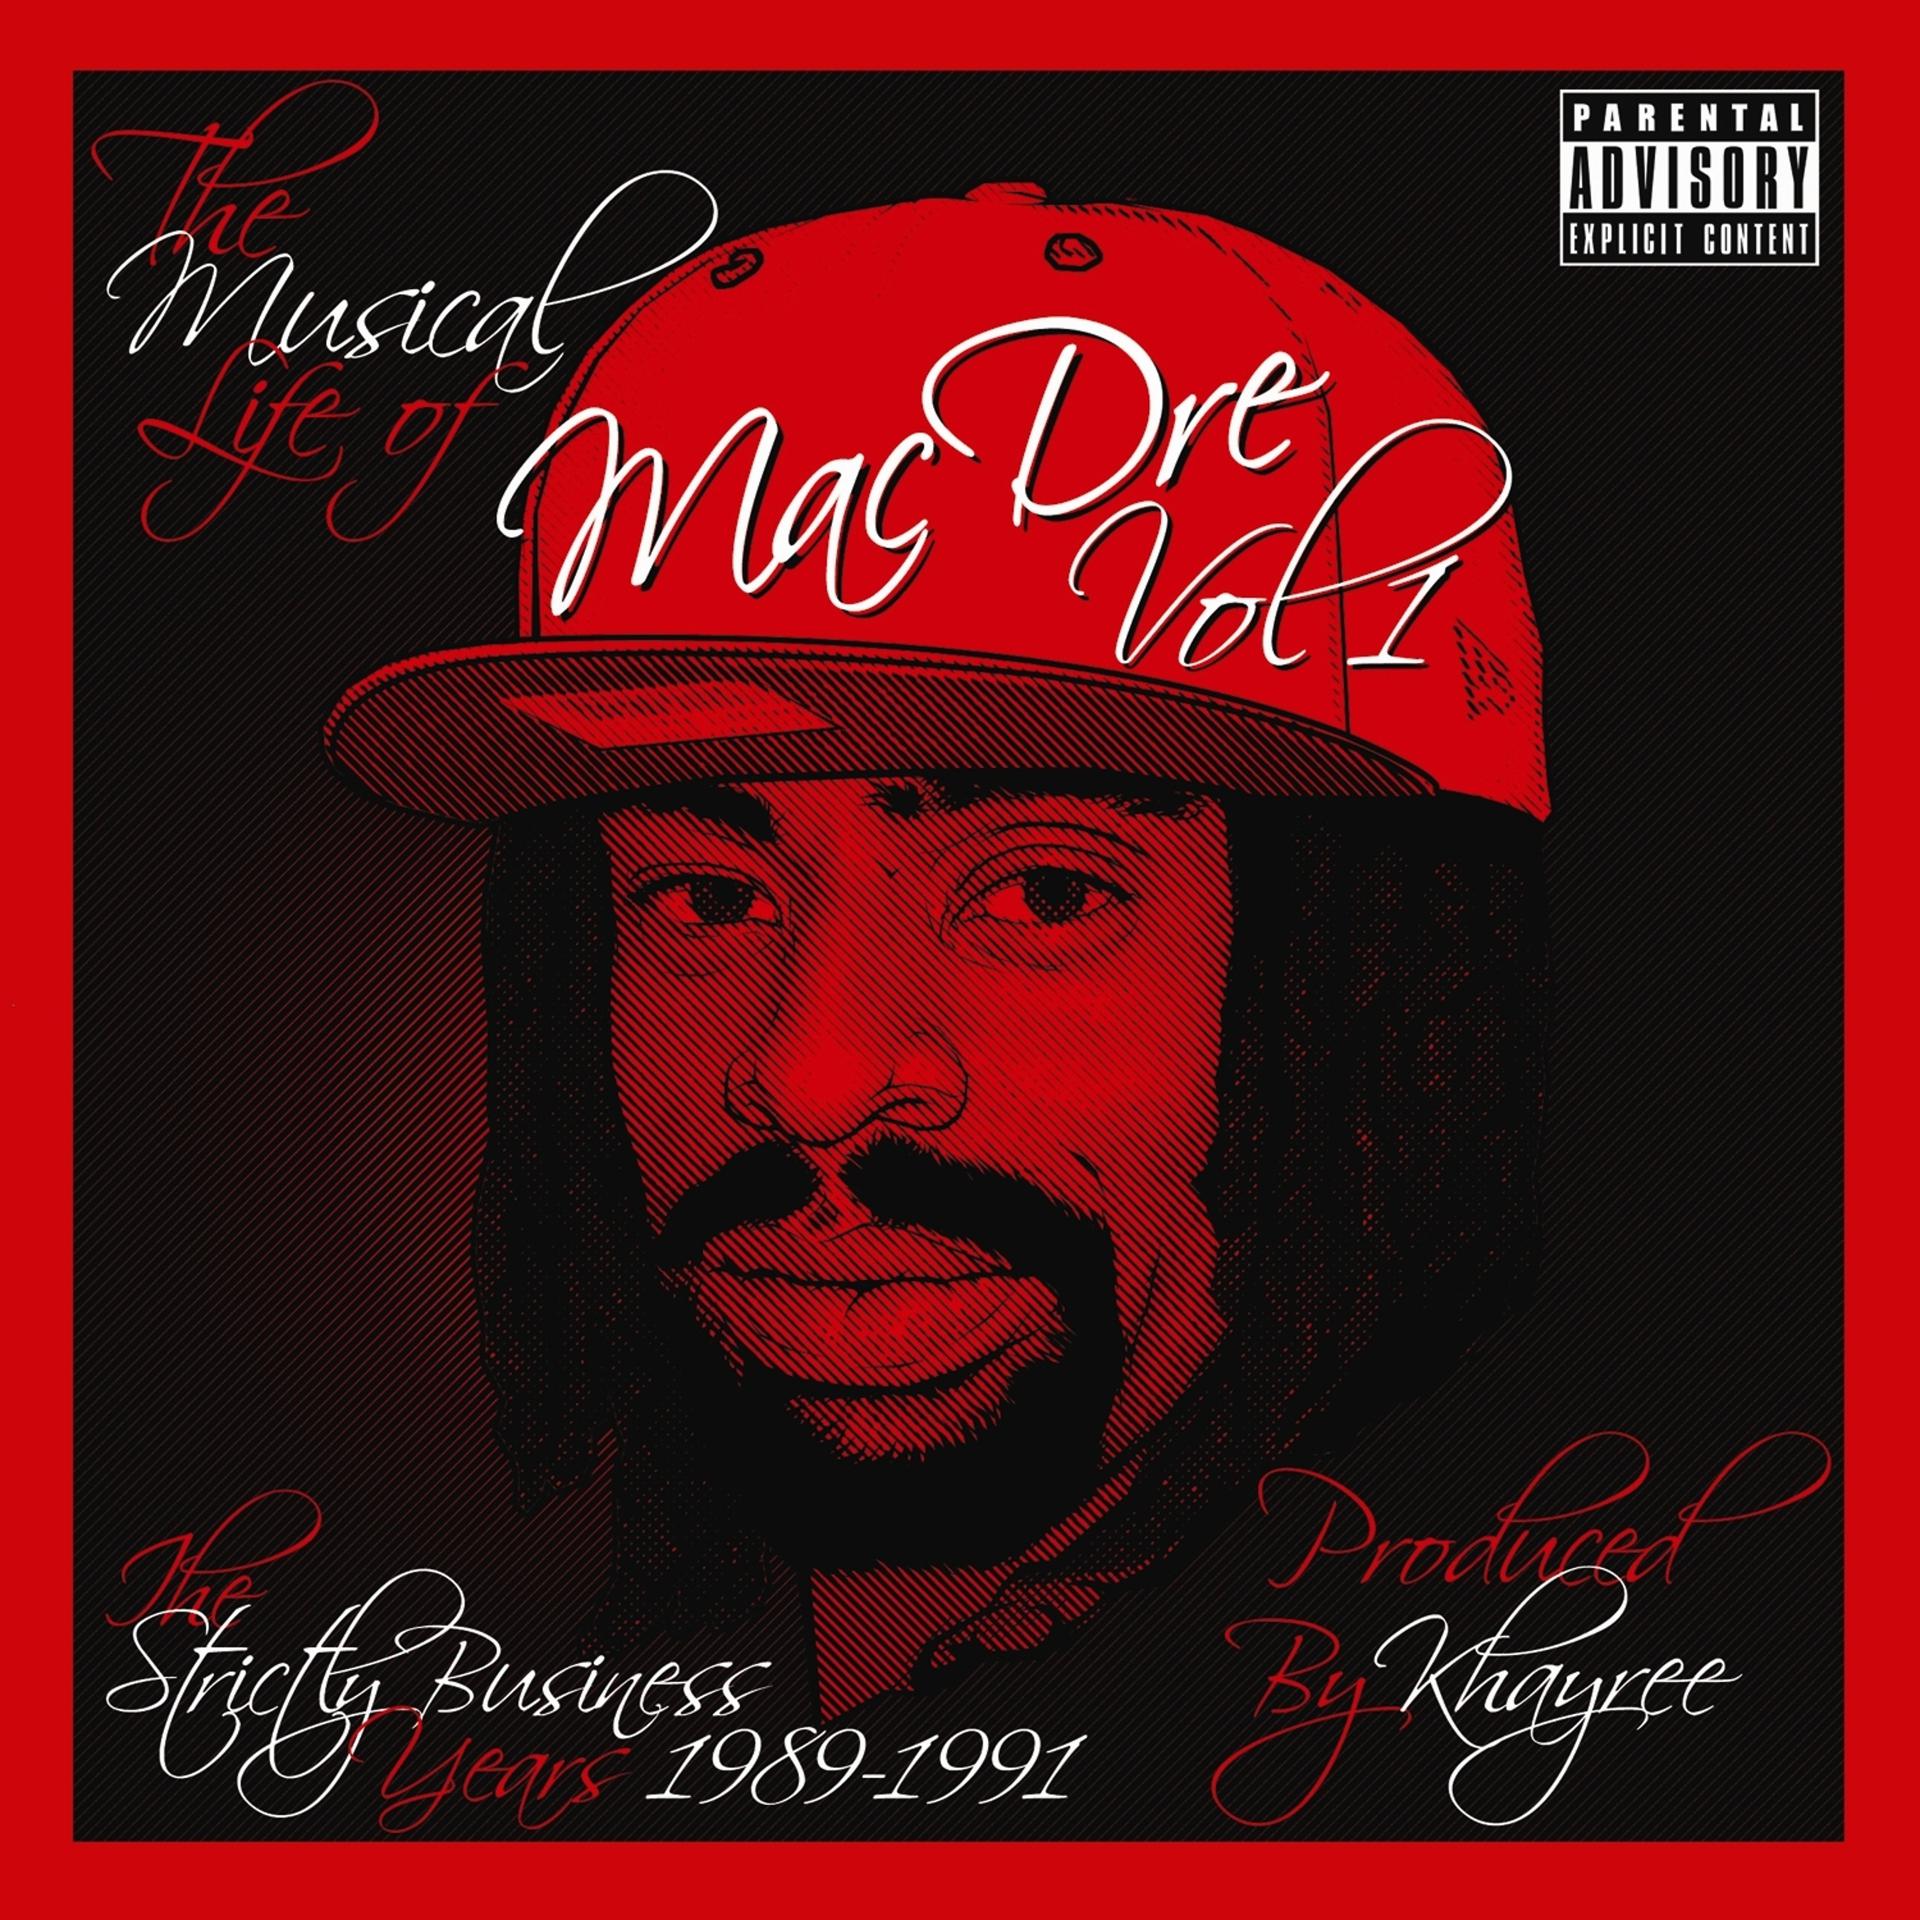 Постер альбома The Musical Life of Mac Dre Vol 1 - The Strictly Business Years: 1989-1991